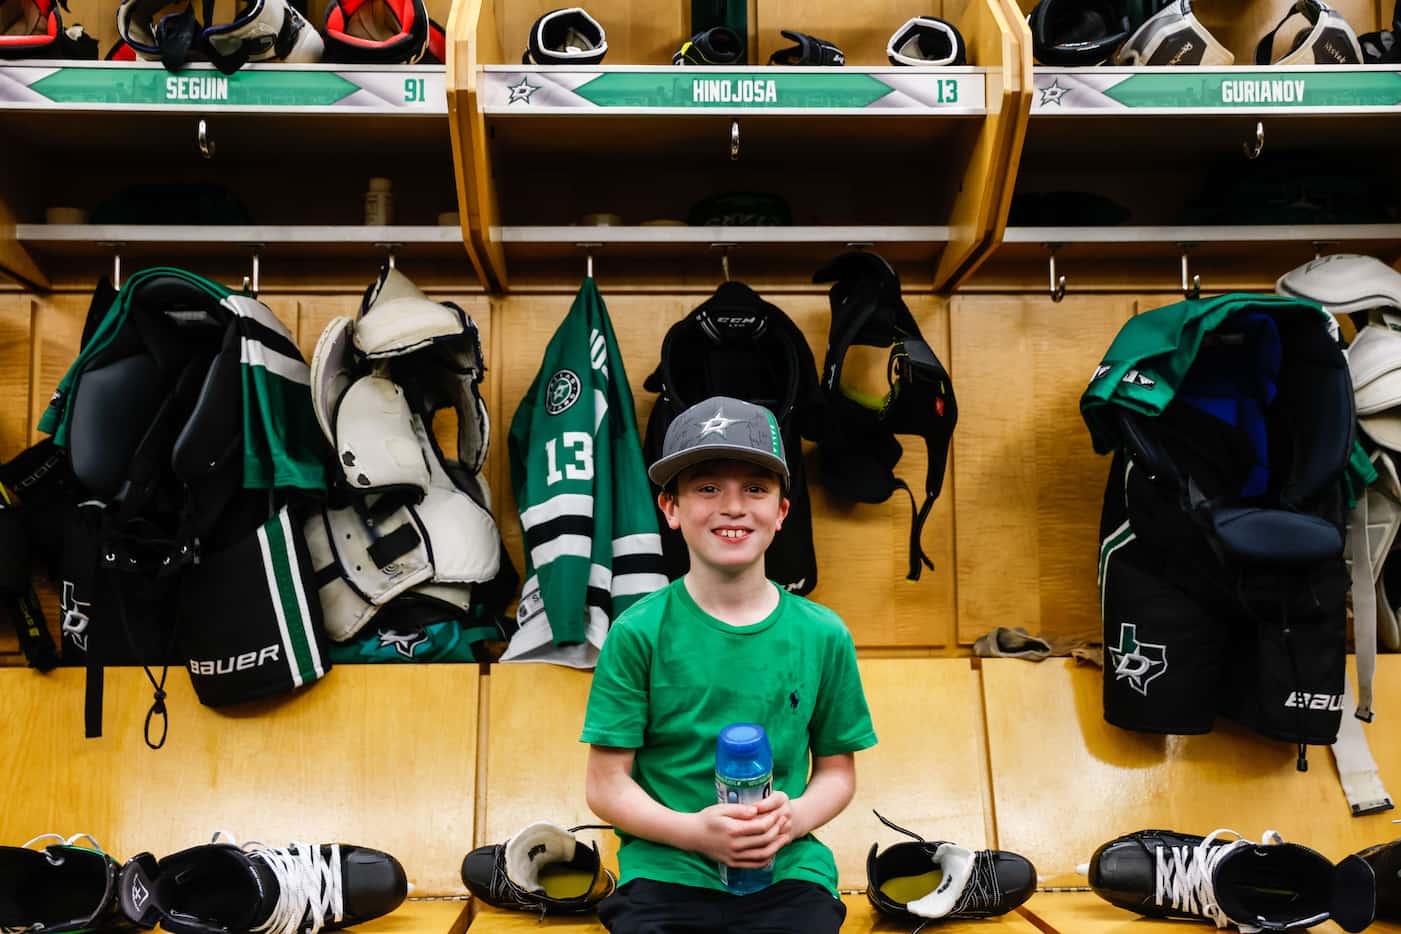 Max Hinojosa, 9, poses for a portrait at his assigned locker in the locker room of the...